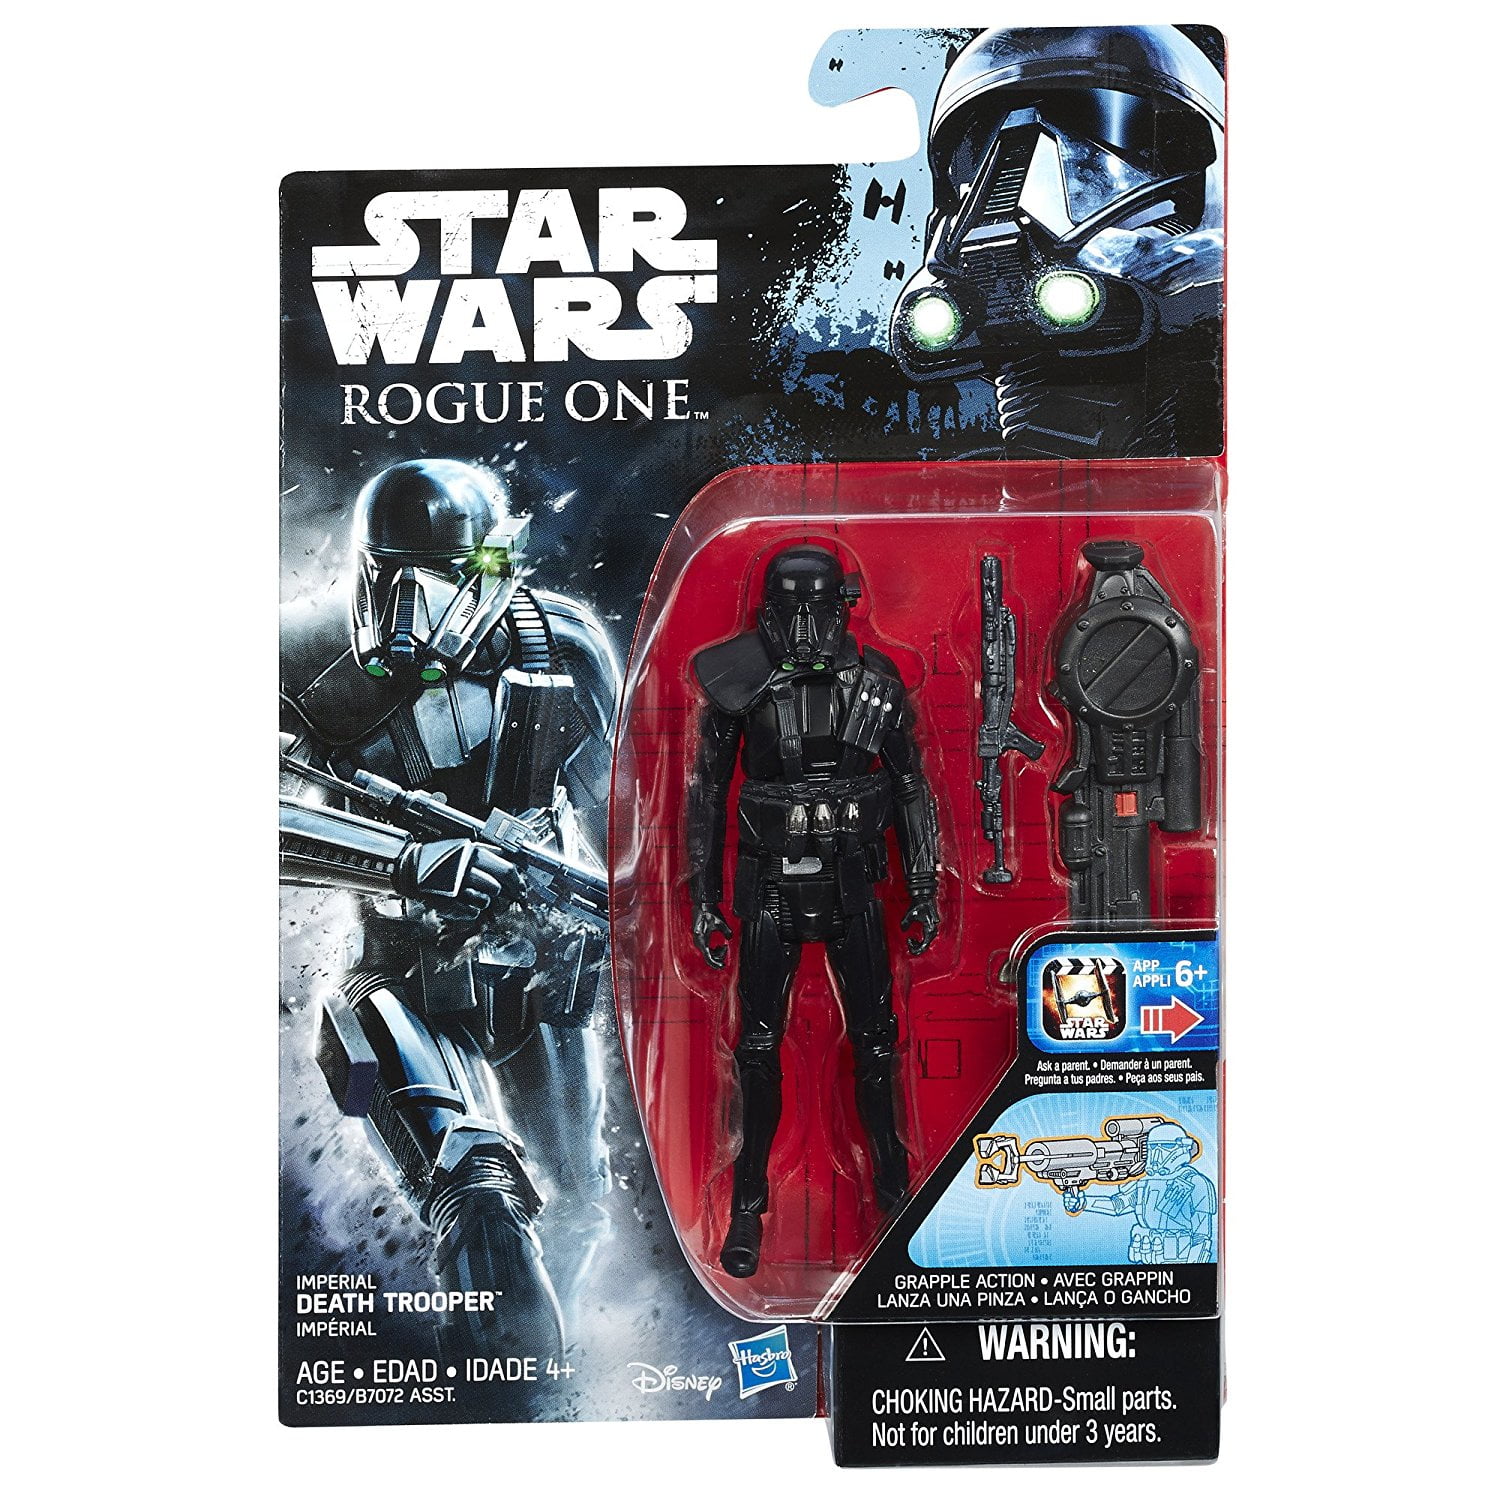 Star Wars Rogue One Imperial Death Trooper 12" Action Figure for sale online 